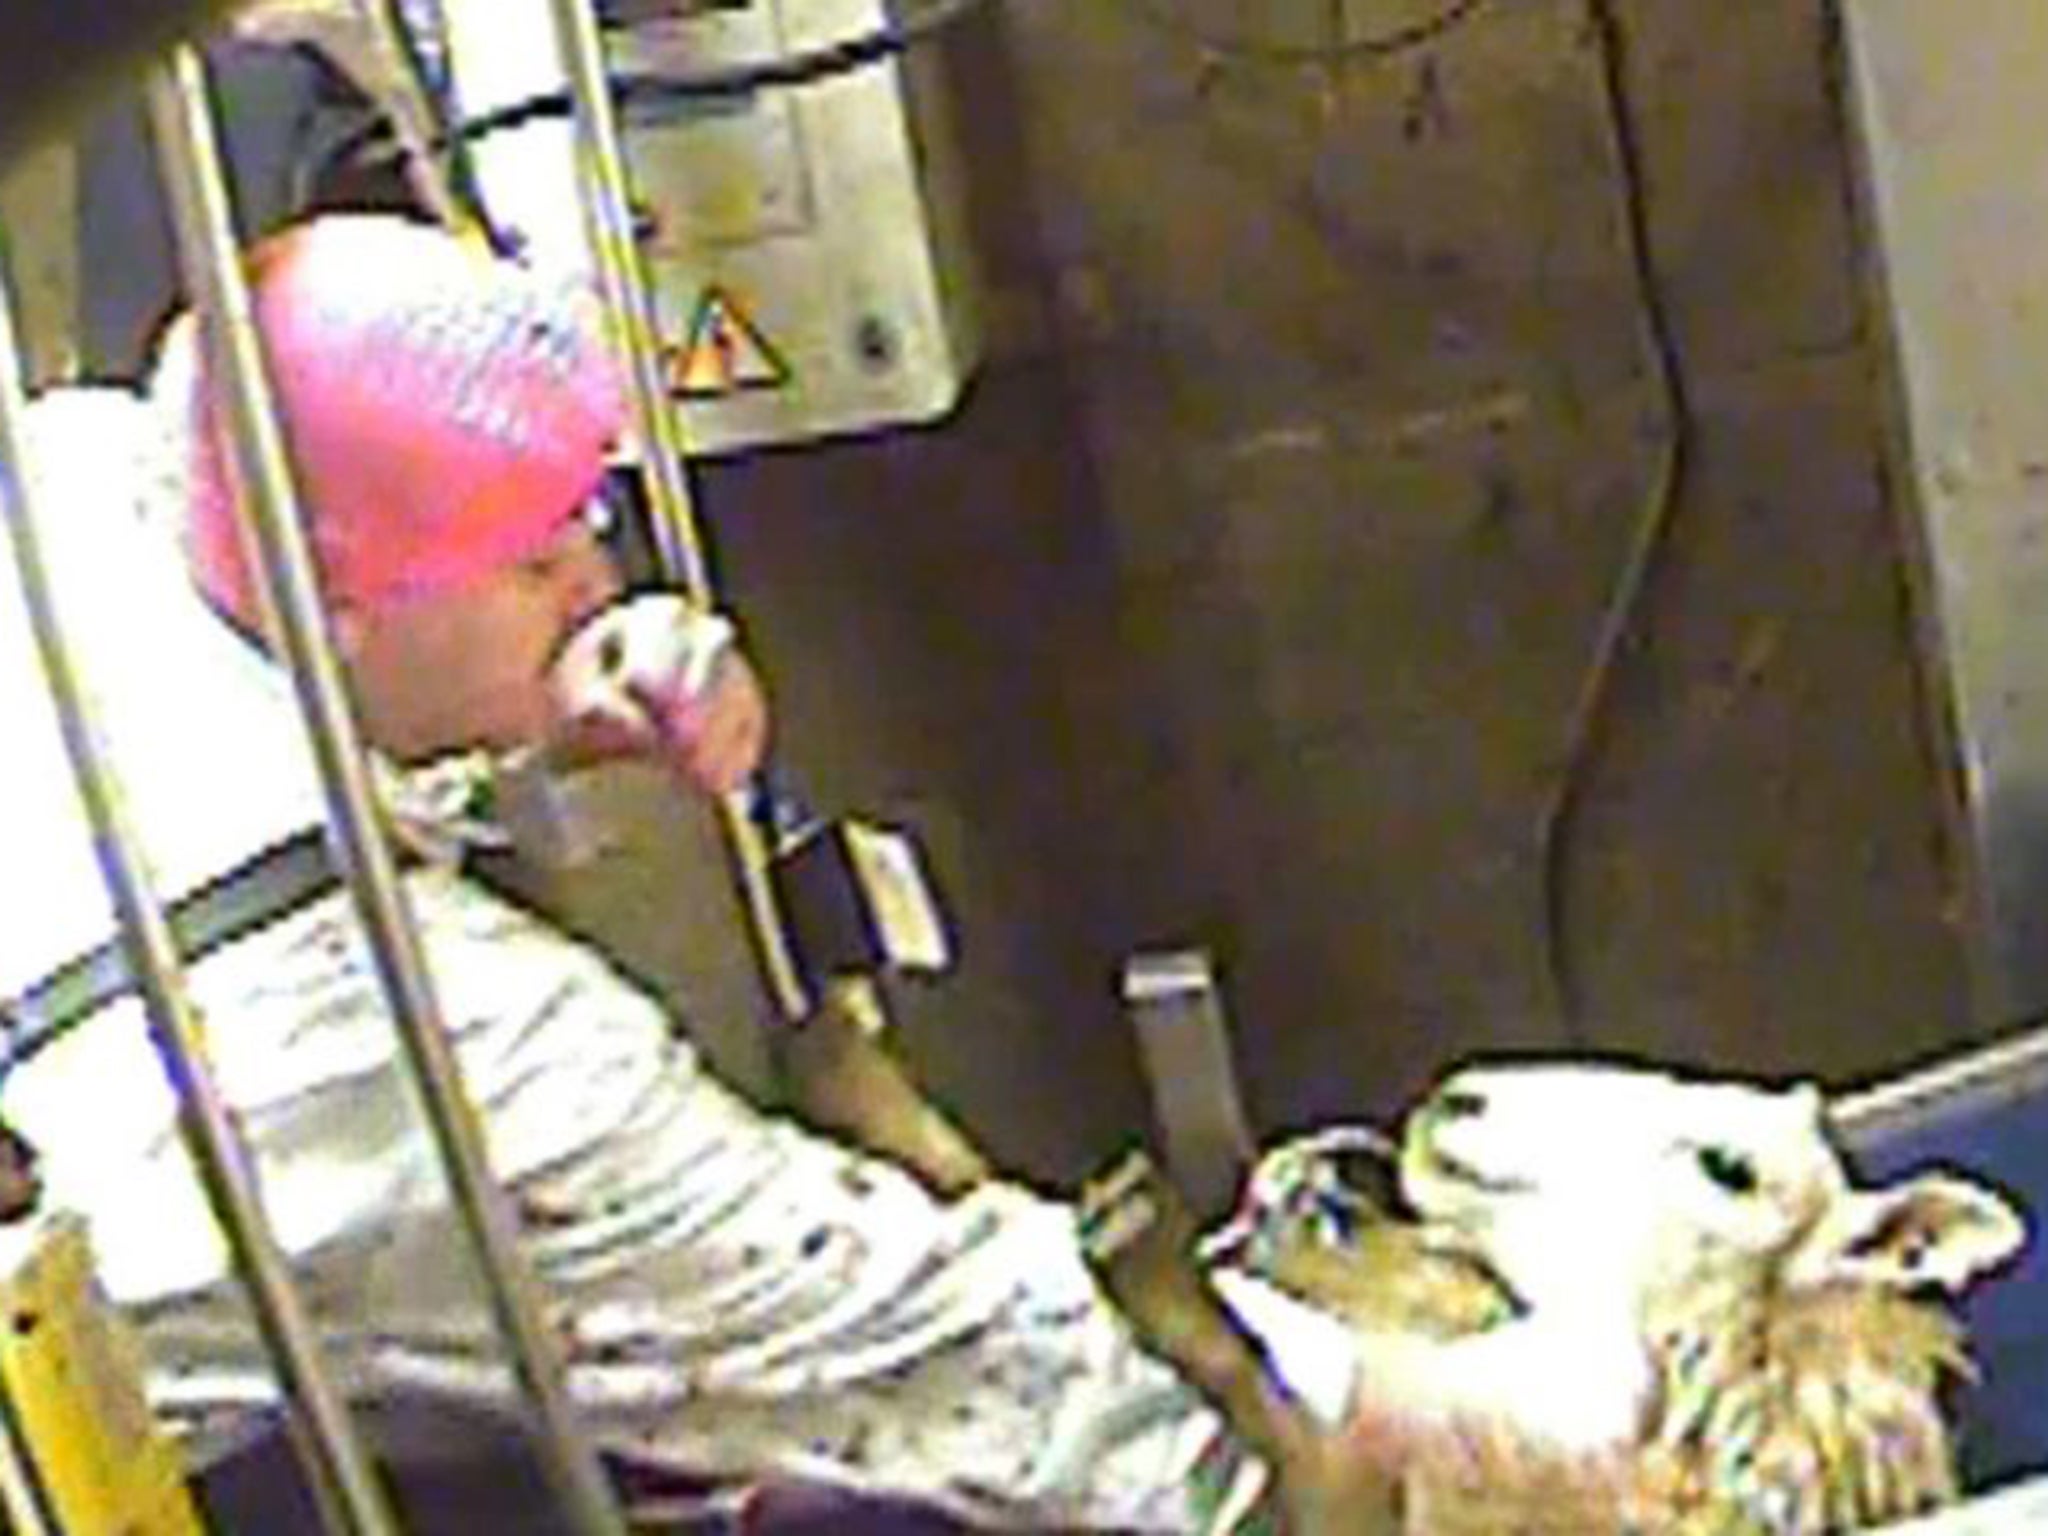 Footage showed workers hacking at animals’ throats and kicking them in the face